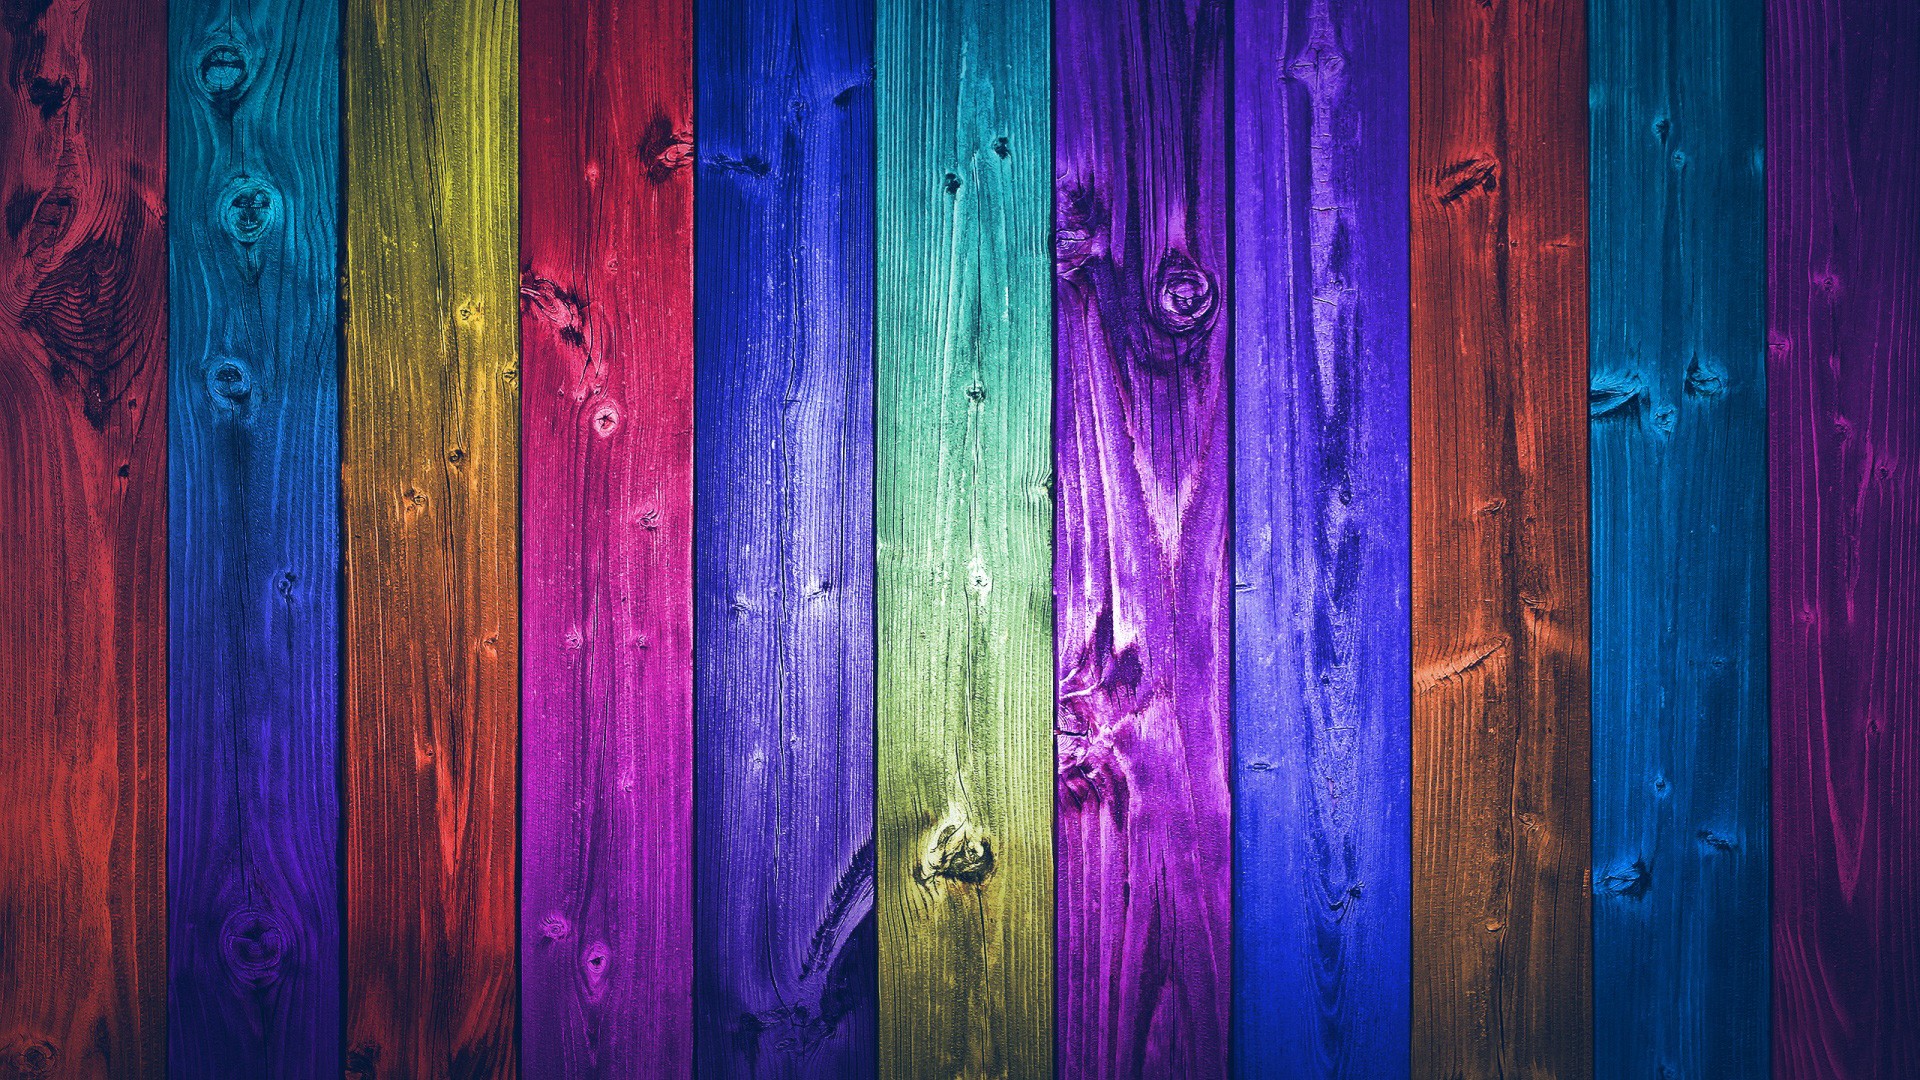 Download Colorful Wooden Plates Wallpaper Free Wallpapers